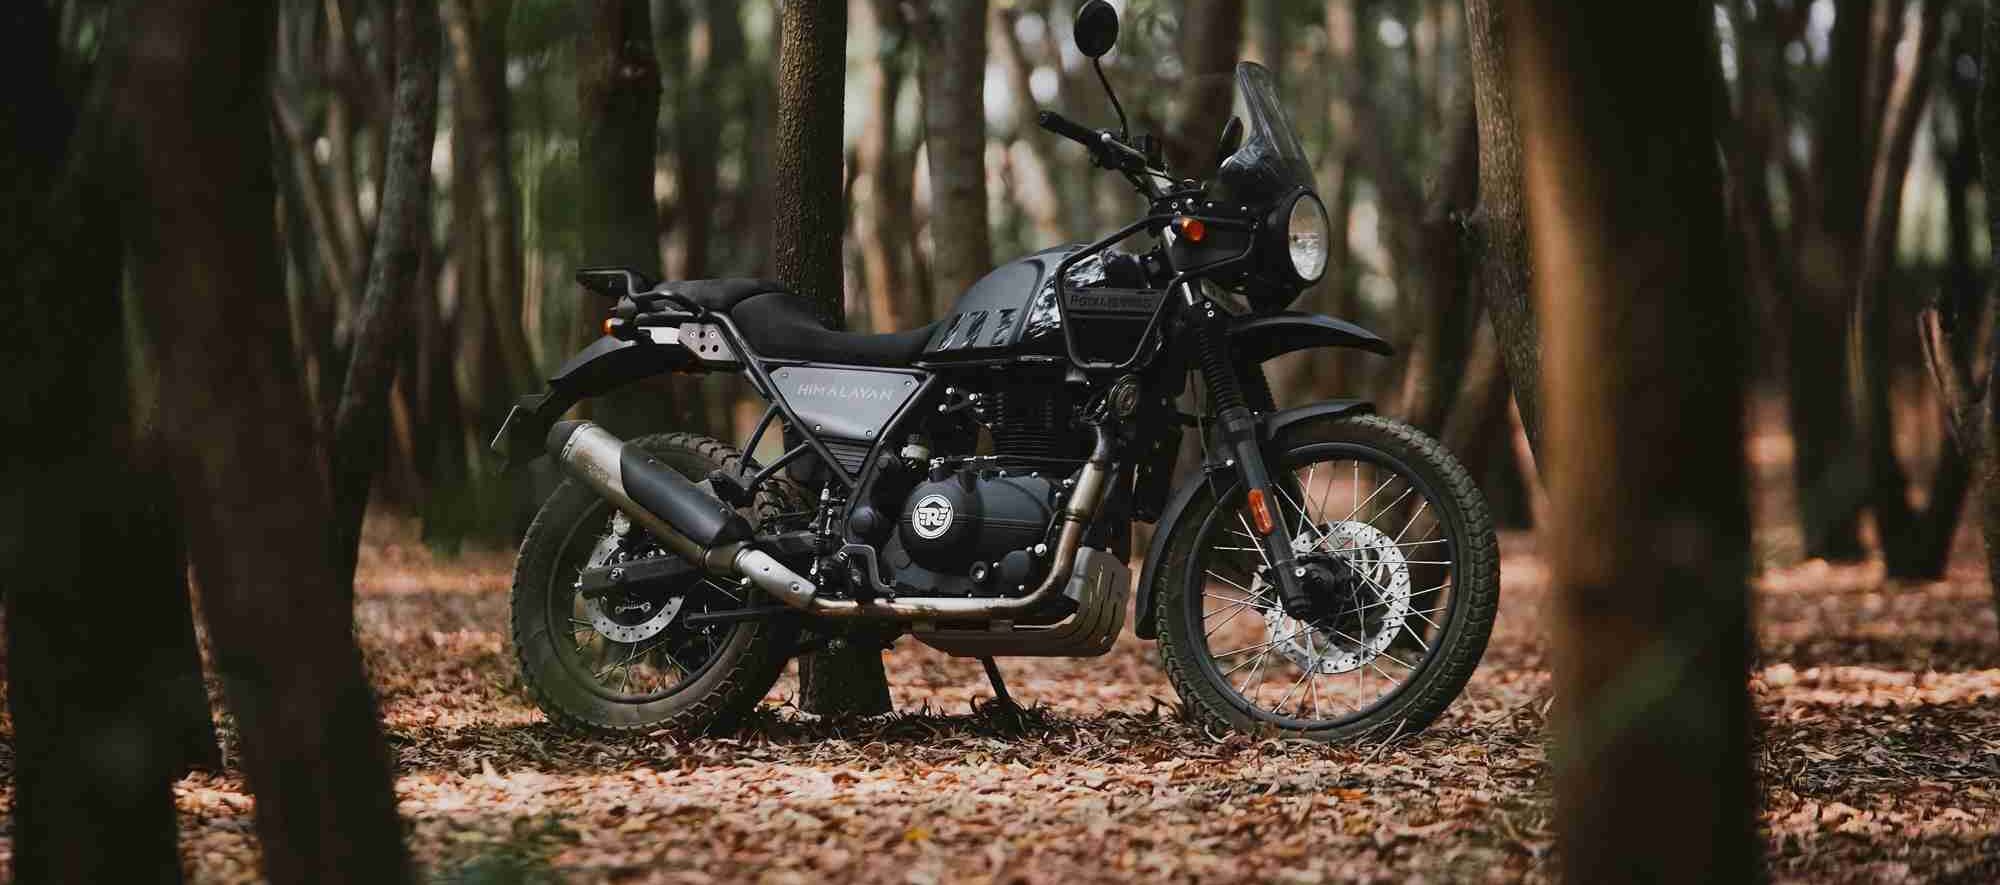 Royal Enfield Himalayan 452: 40 PS power, engine details leaked. Exciting stuff!